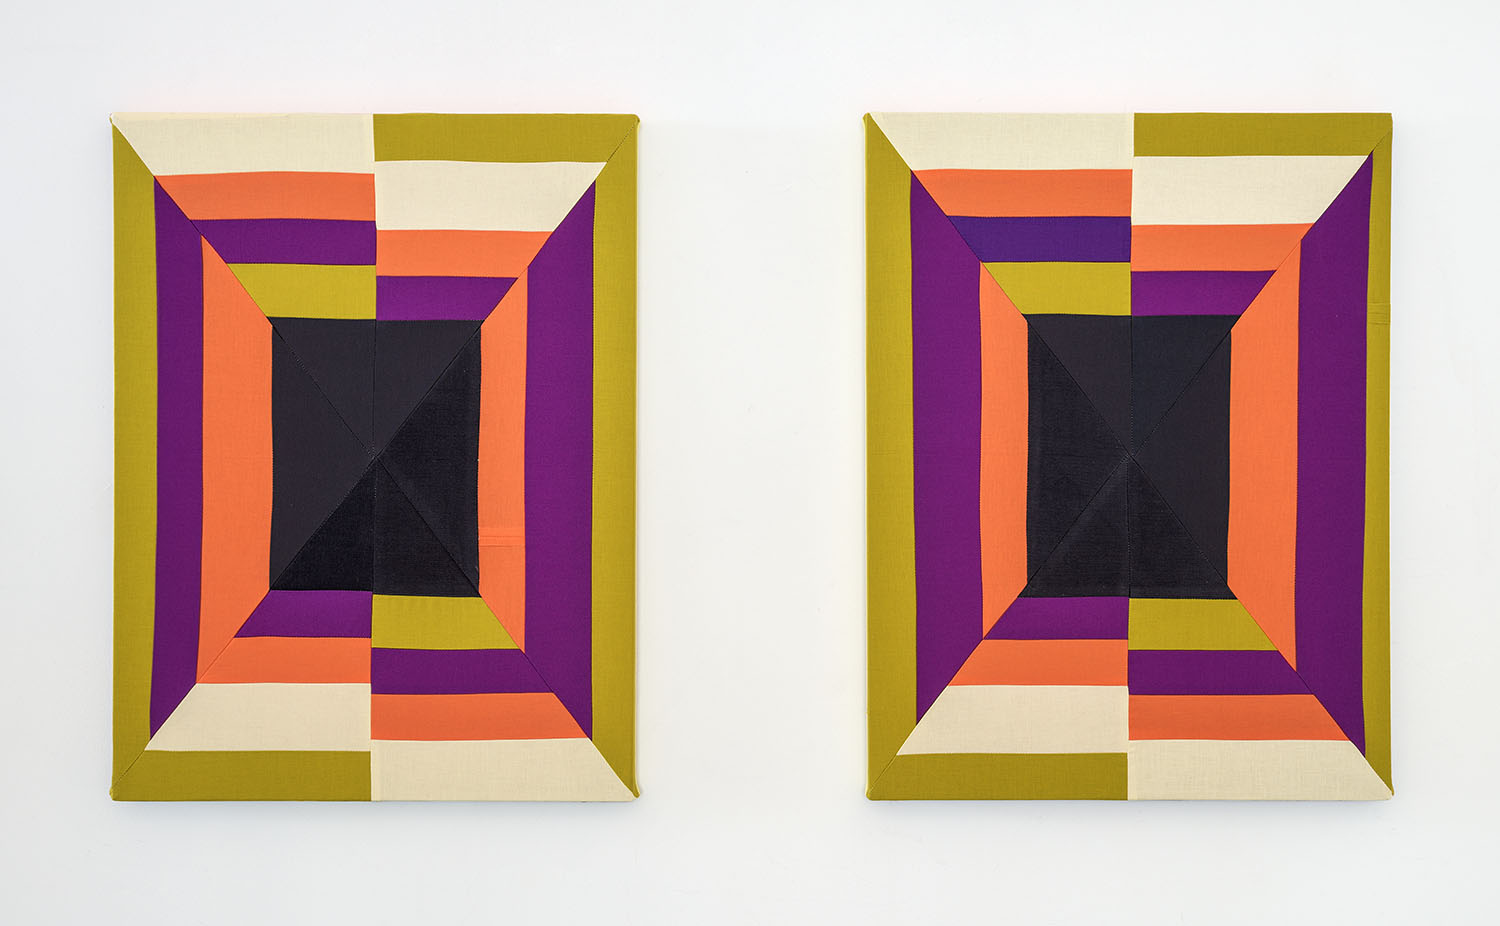    Crush On You (Diptych)  , 2019 Sewn cotton, corduroy, canvas 24 x 18 inches each (61 x 45.7 cm each) 